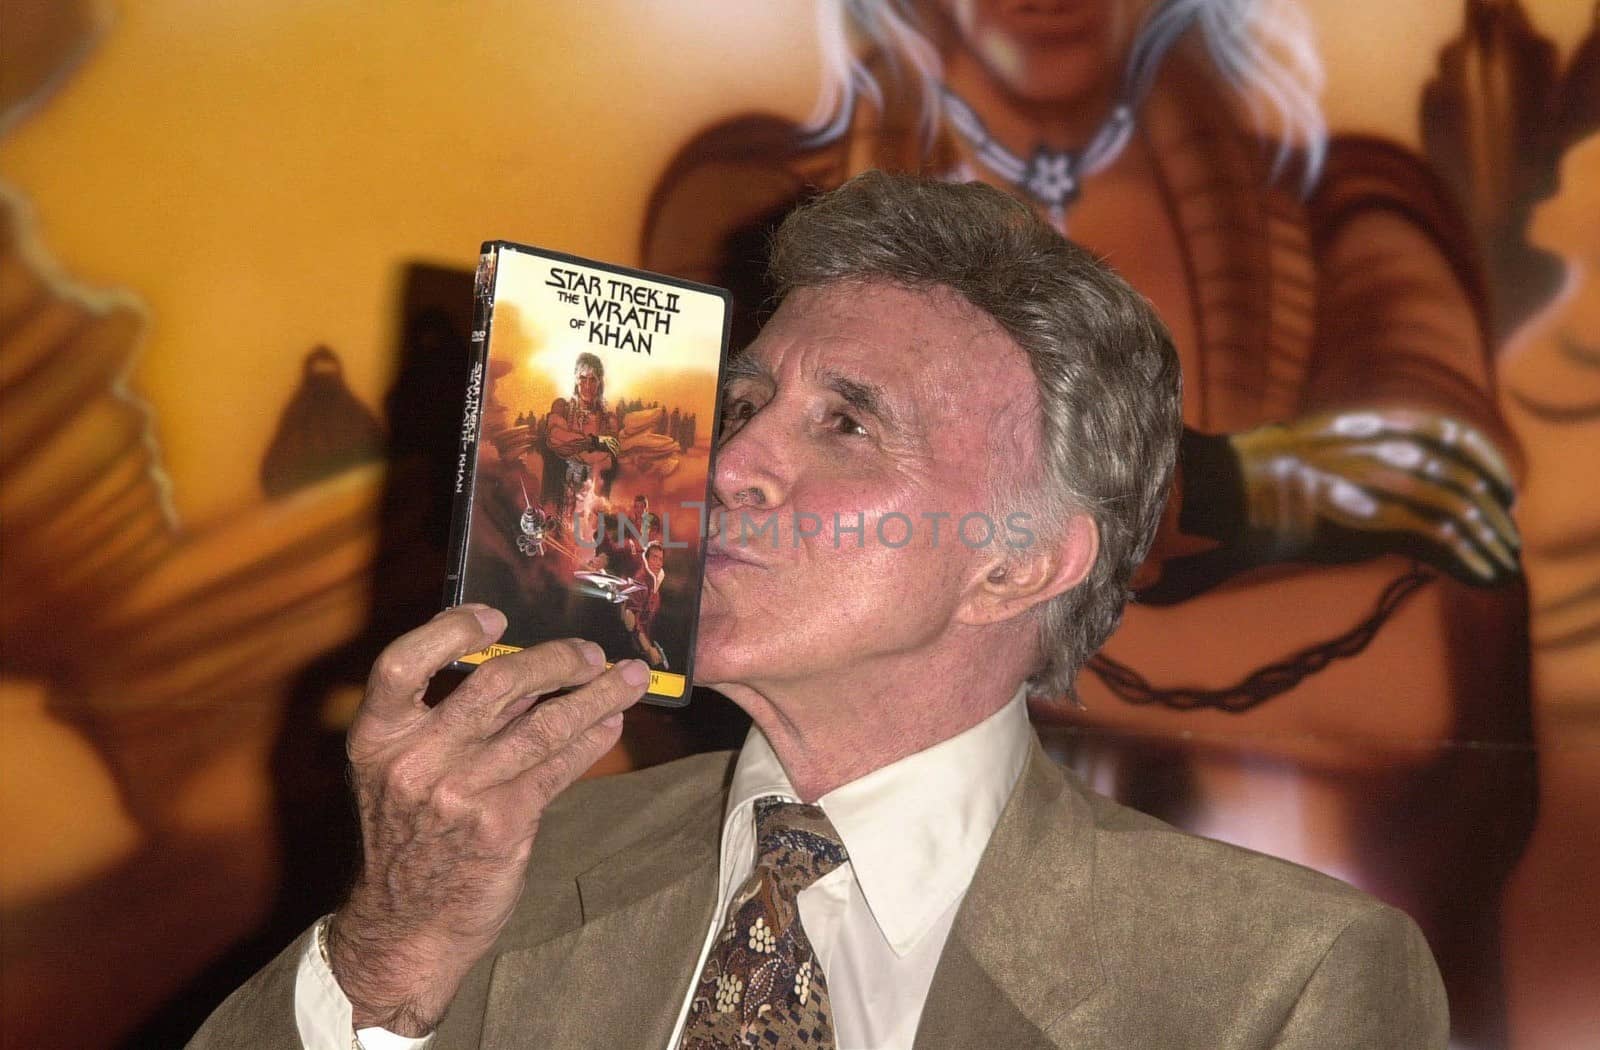 Ricardo Montalban makes an appearance in Universal City in honor of "Star Trek The Wrath Of Khan" DVD release. 07-11-00